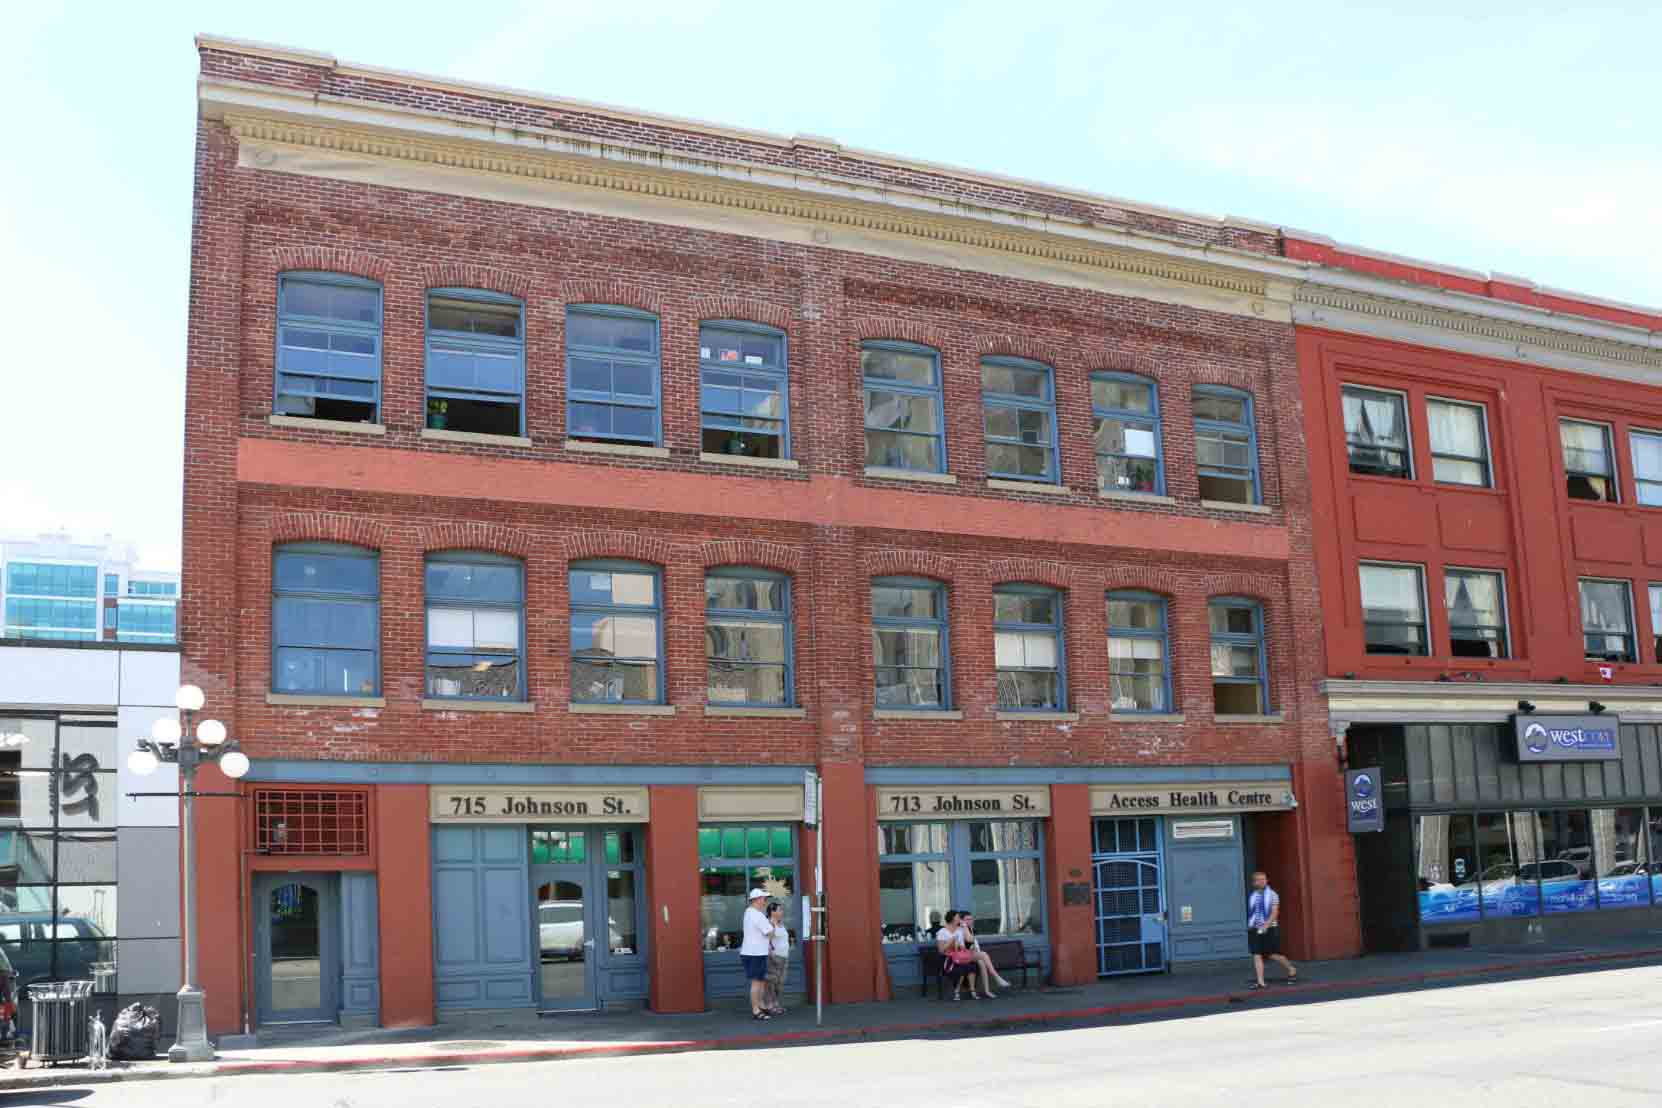 713-715 Johnson Street, built in 1908 for Mable Carriage Works by architects Thomas Hooper and C. Elwood Watkins